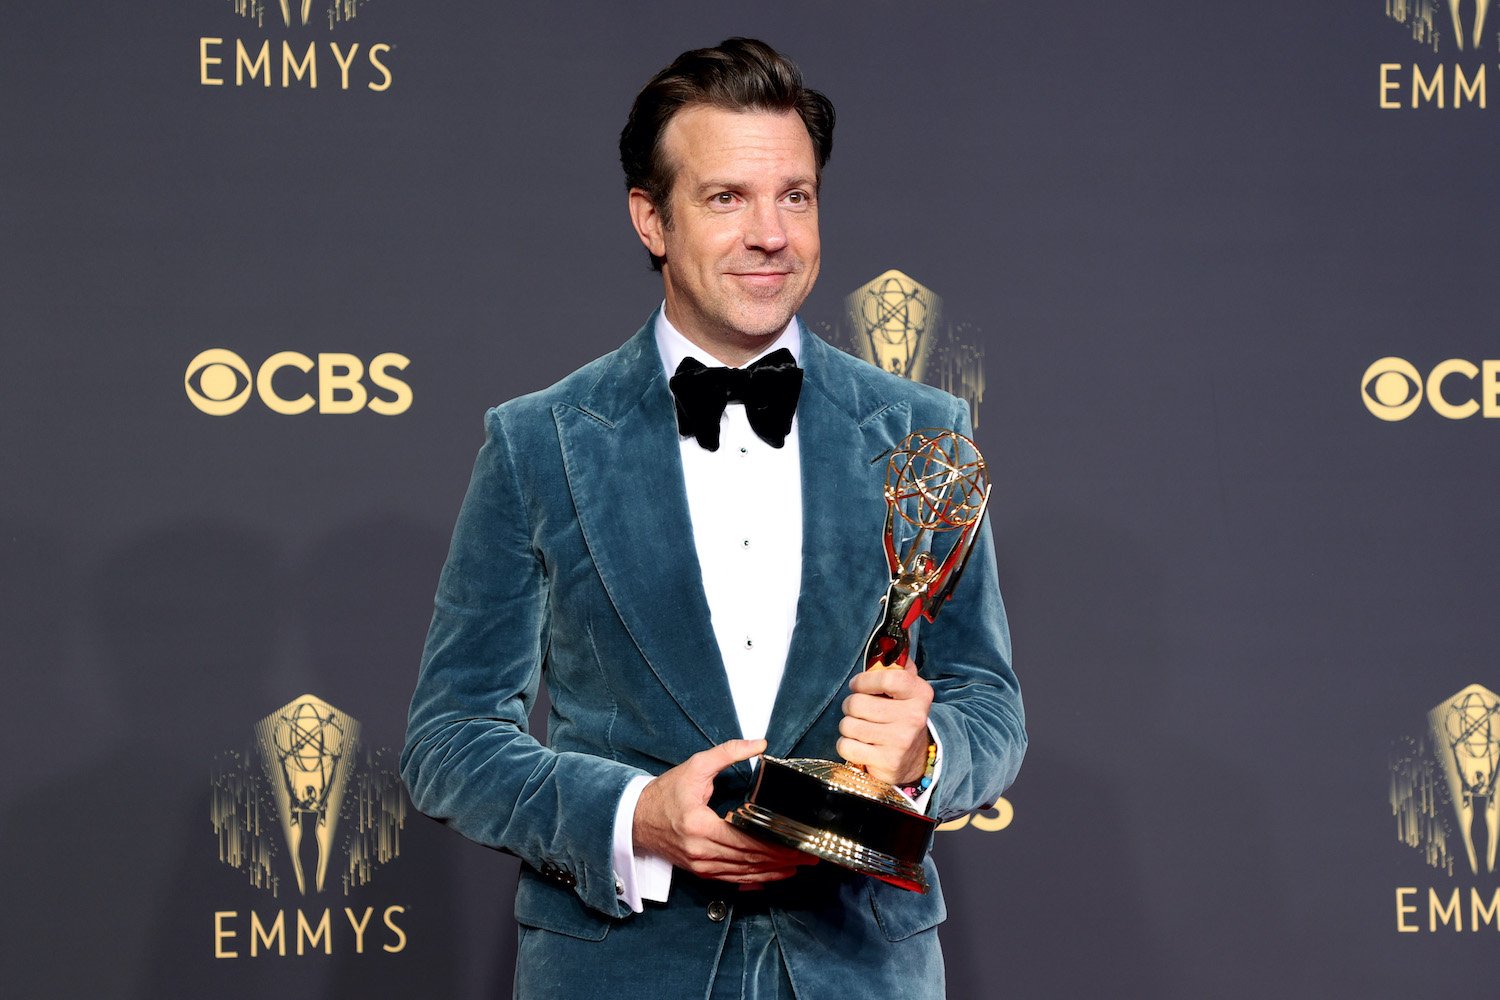 Jason Sudeikis, winner of 2021 Emmys Outstanding Lead Actor in a Comedy Series for 'Ted Lasso', poses in the press room